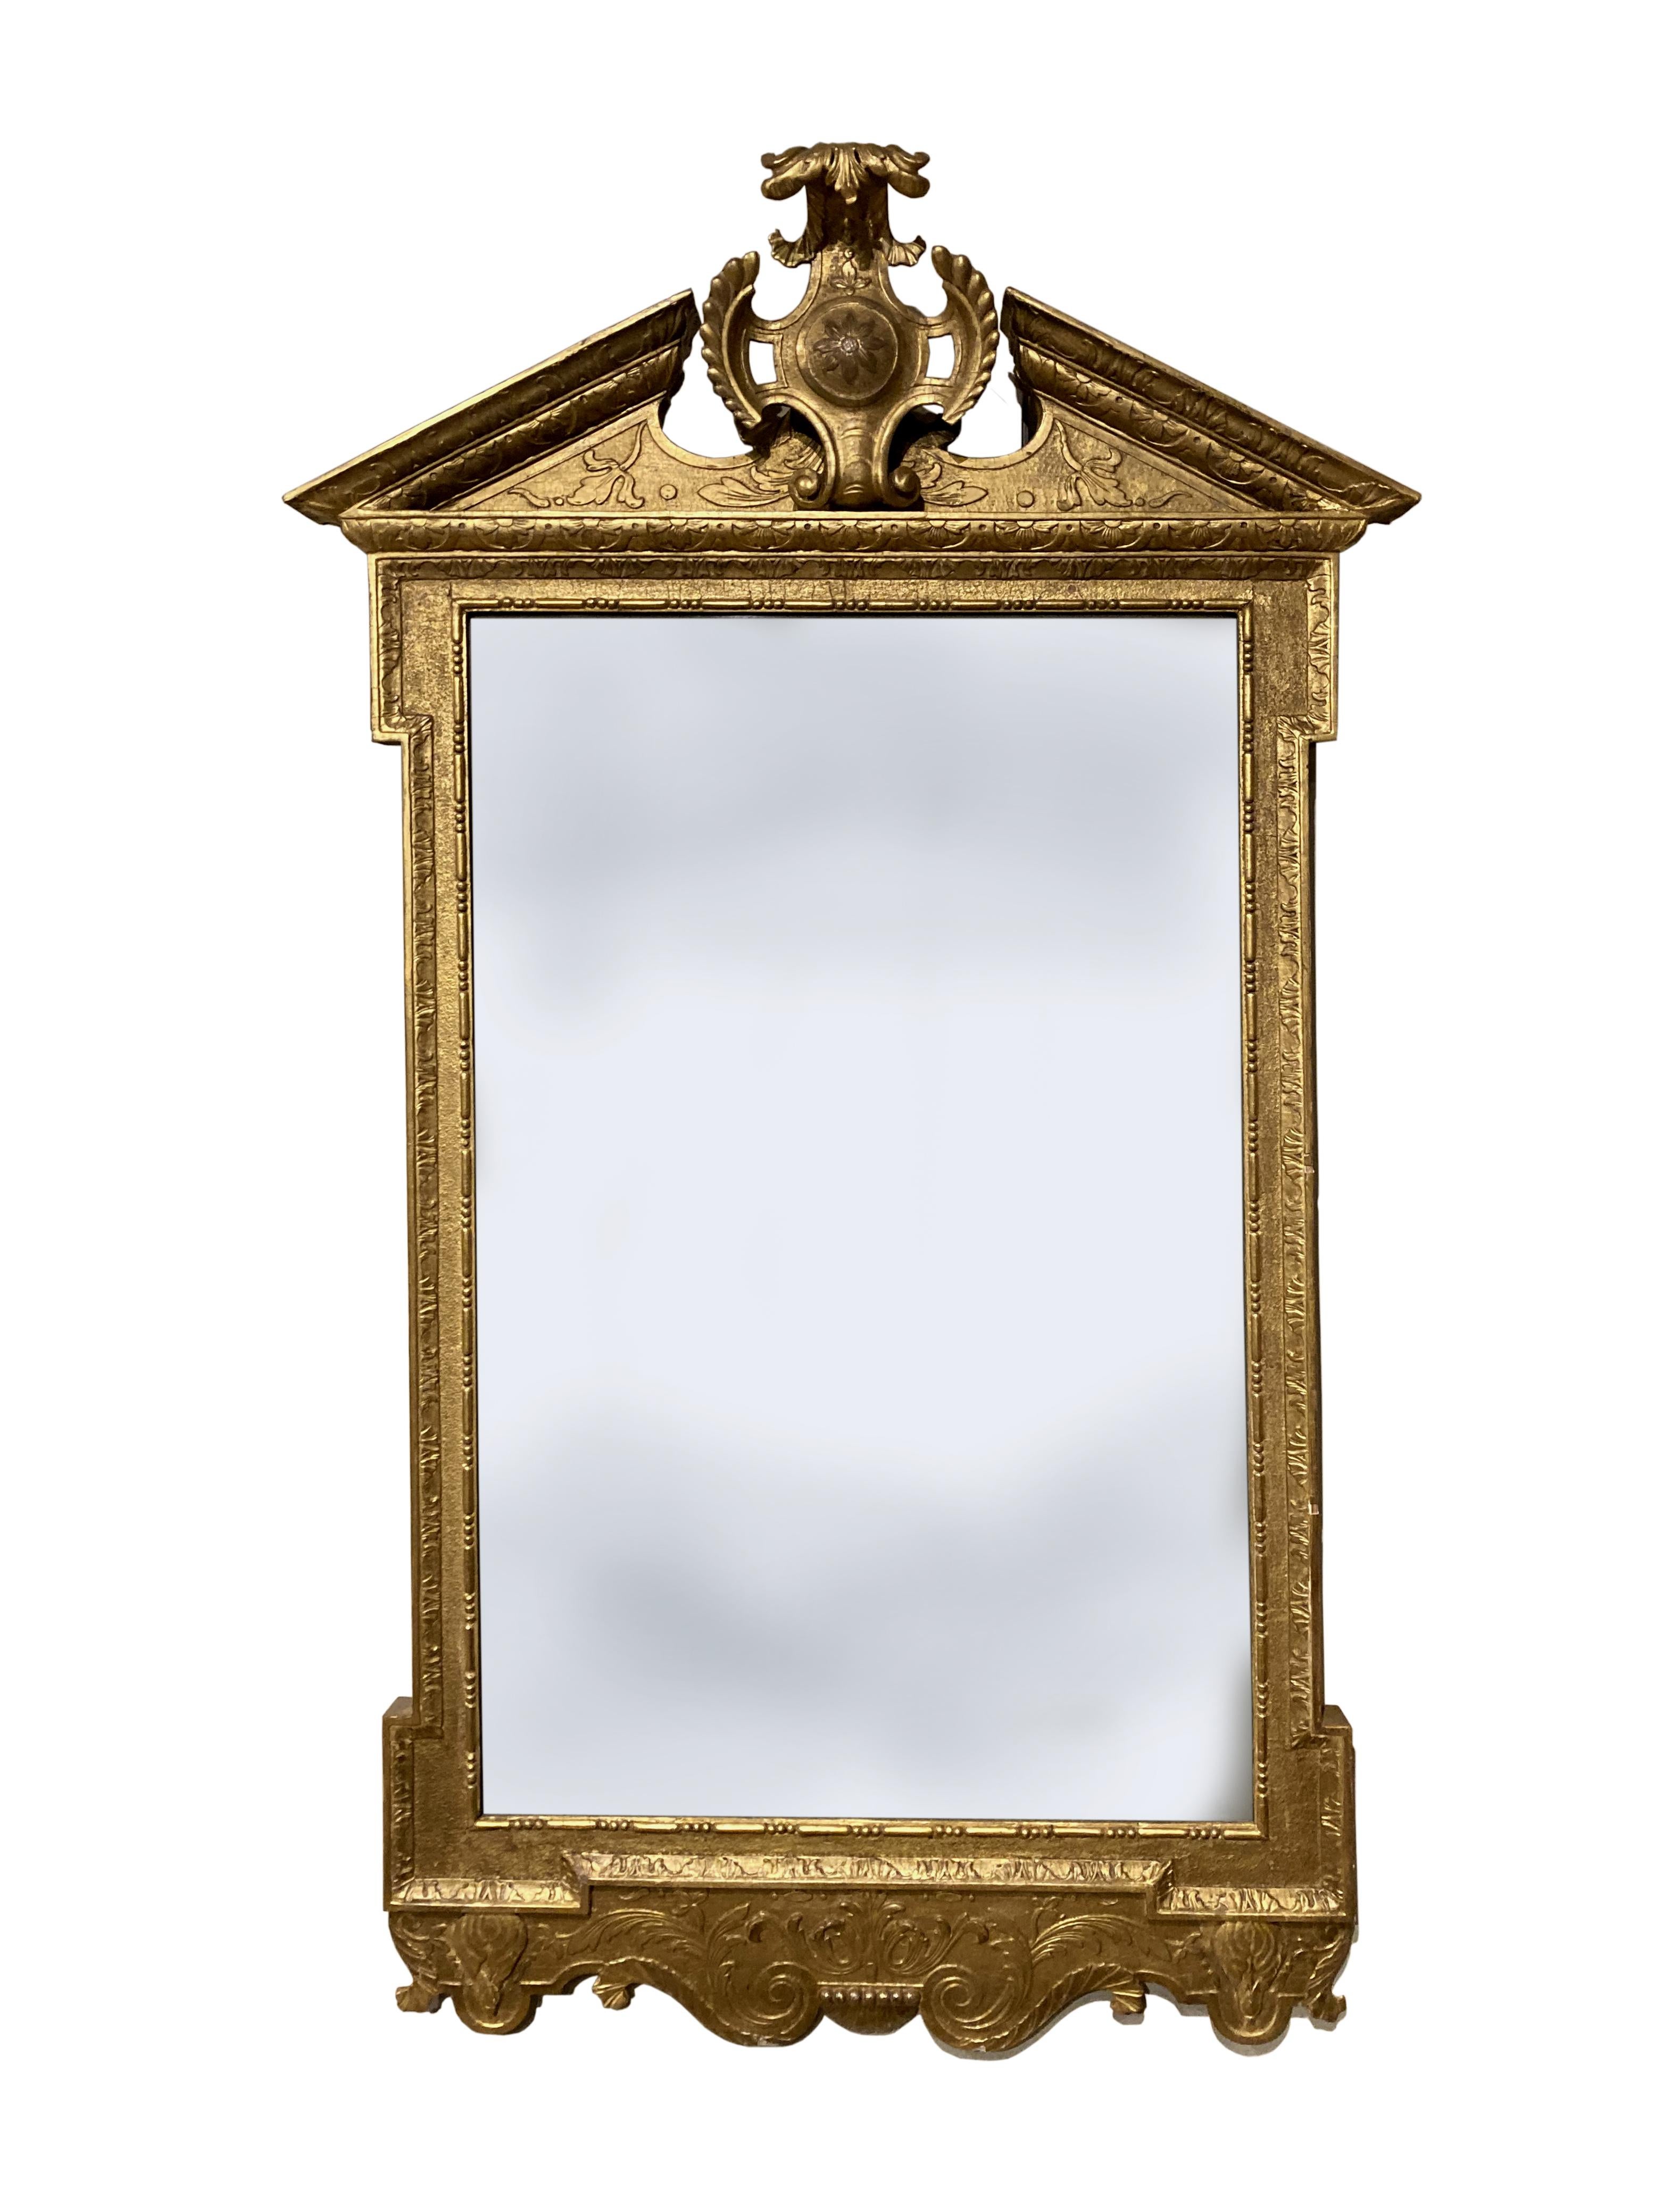 A rare pair of early Georgian cut gesso mirrors mainly in their original gilt; the plates look original but were probably replaced some time ago; a finely carved cartouche in the centre of the broken pediment.